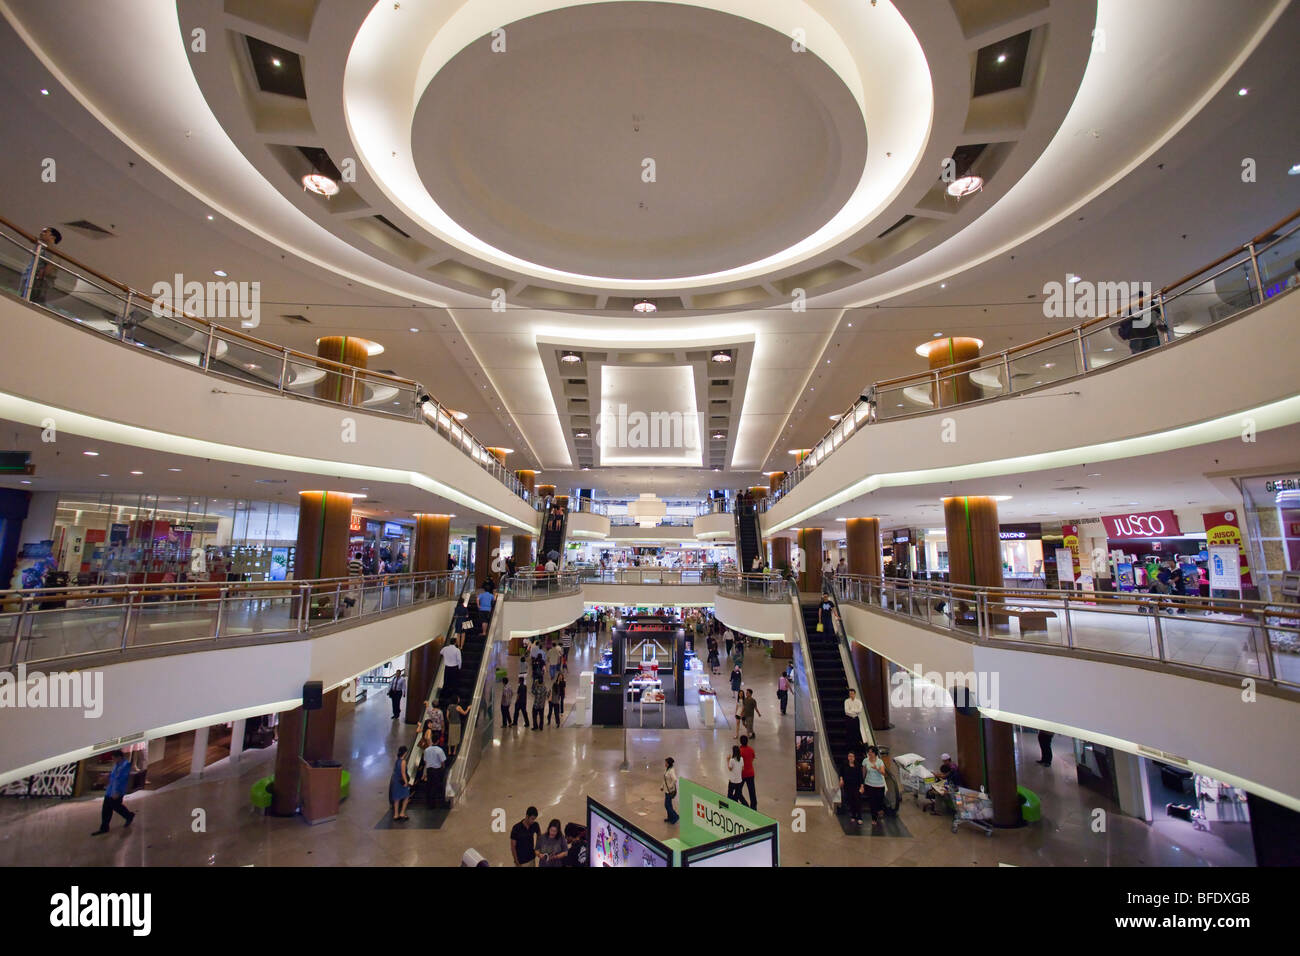 189 Mid Valley Megamall Images, Stock Photos, 3D objects